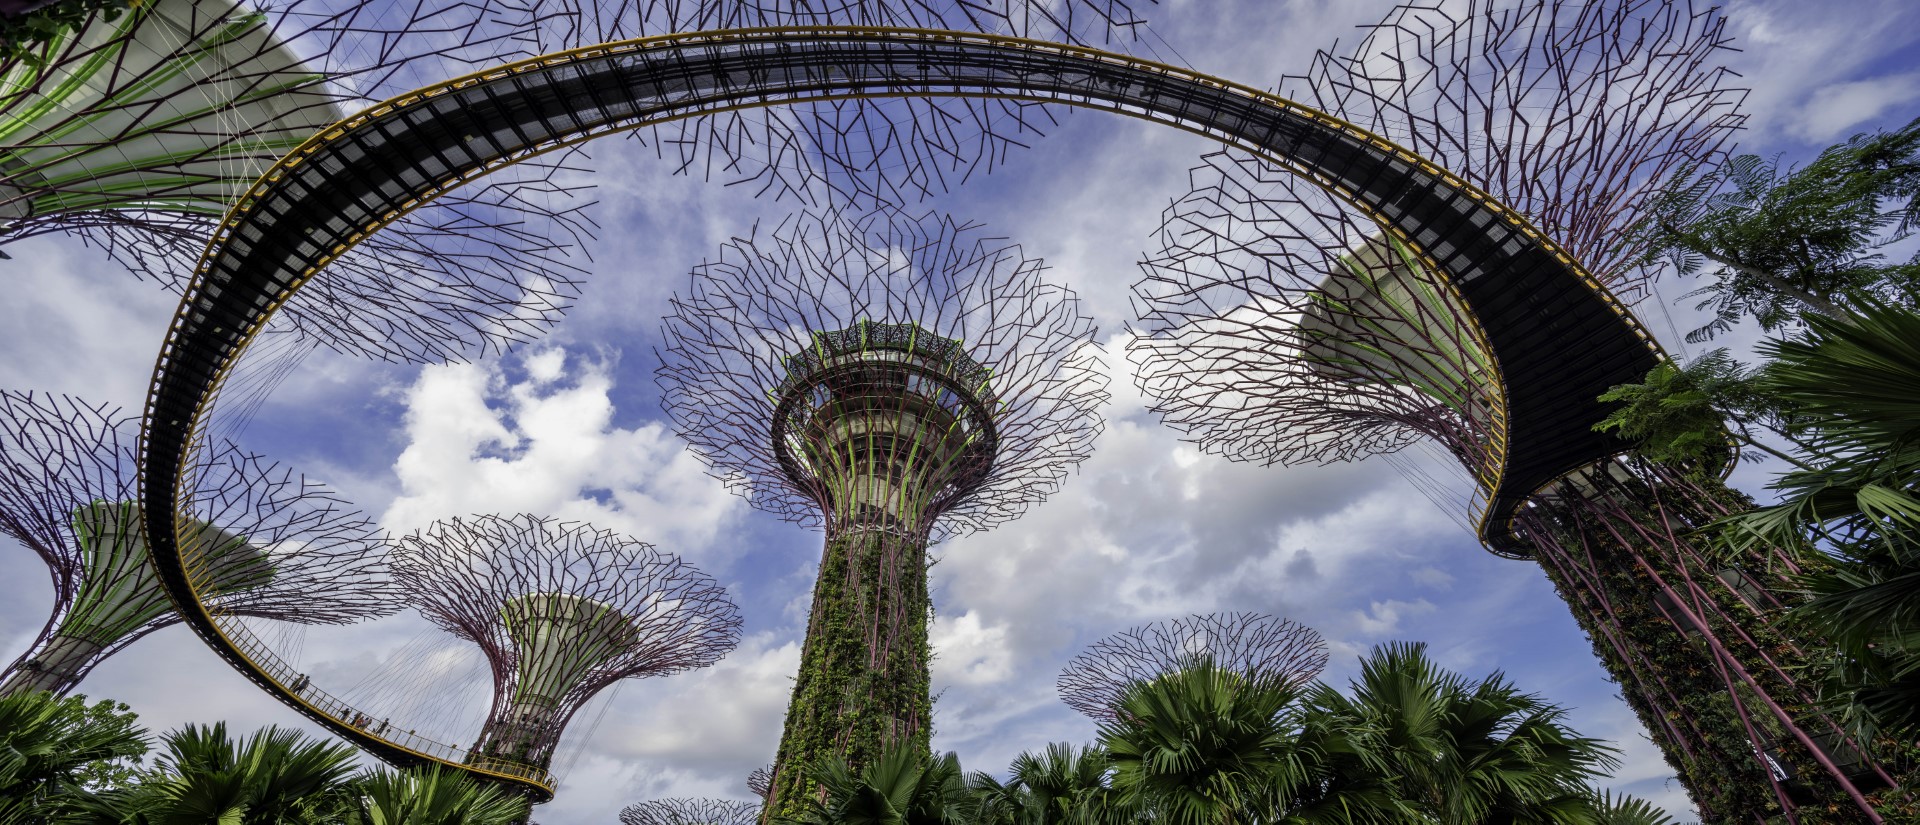 SuperTrees and OCBC Skyway, Gardens by the Bay Singapore